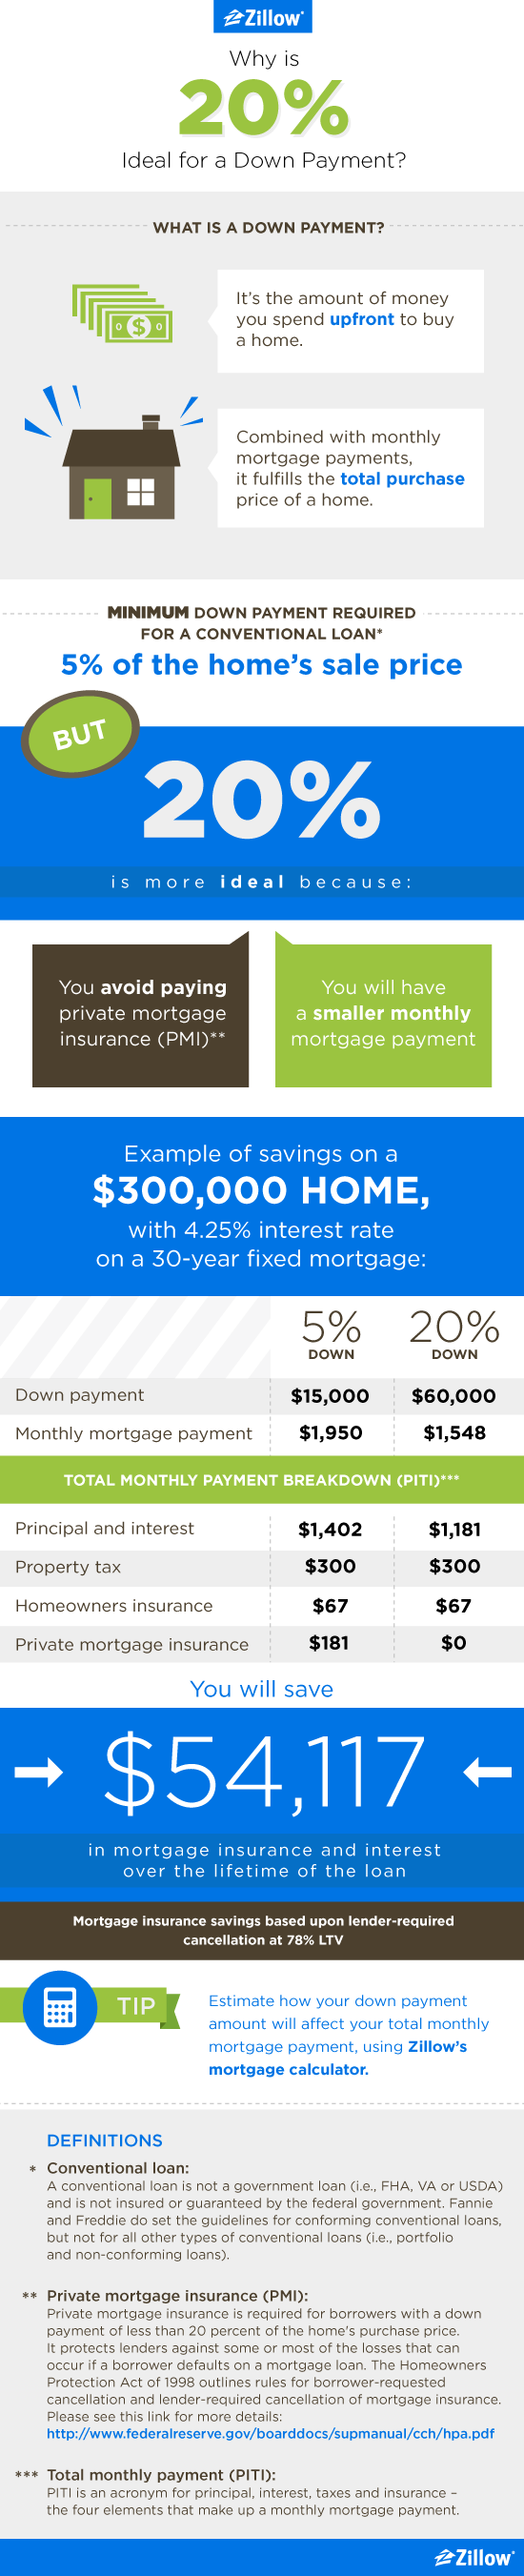 Down Payment on a House - The 20% Rule 